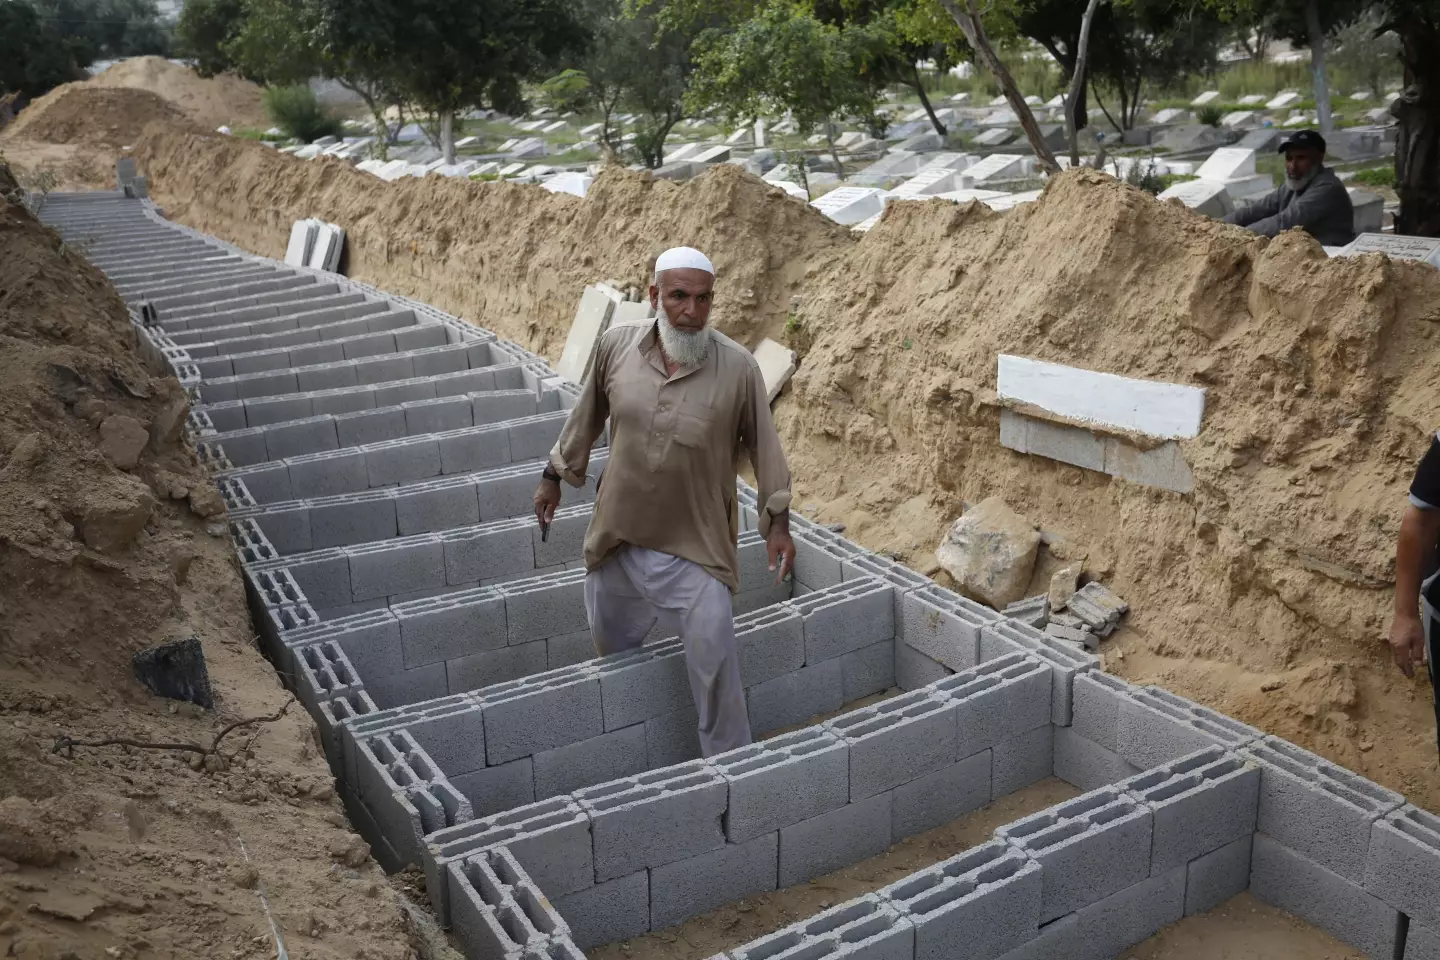 People prepare the graves to bury the dead bodies of Palestinians.